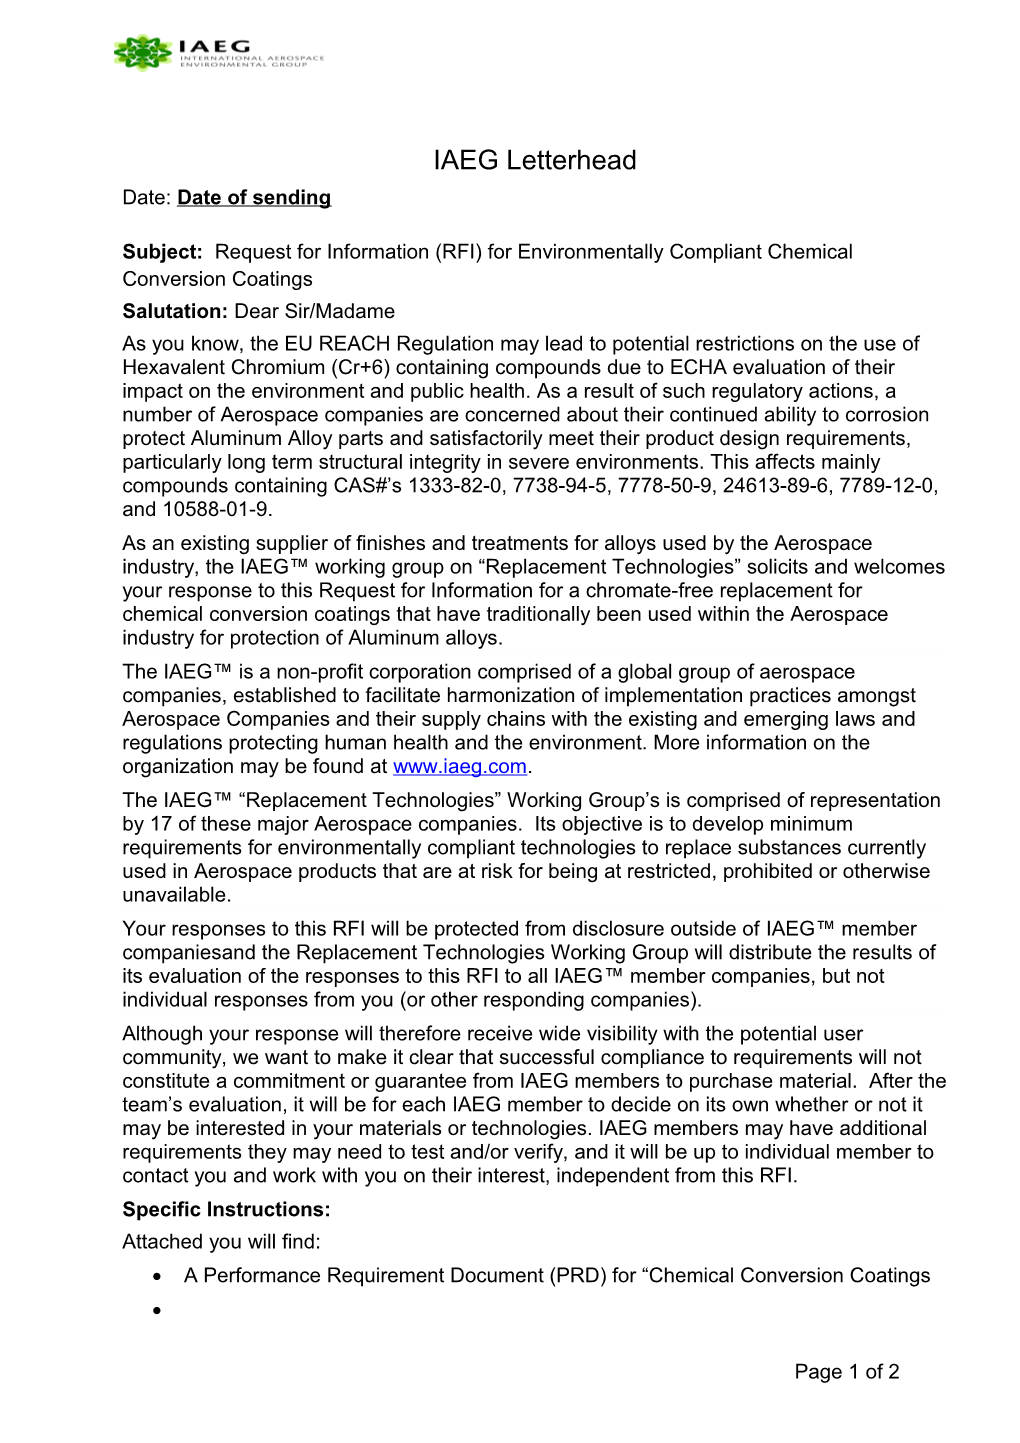 Subject: Request for Information (RFI) for Environmentally Compliant Chemical Conversion